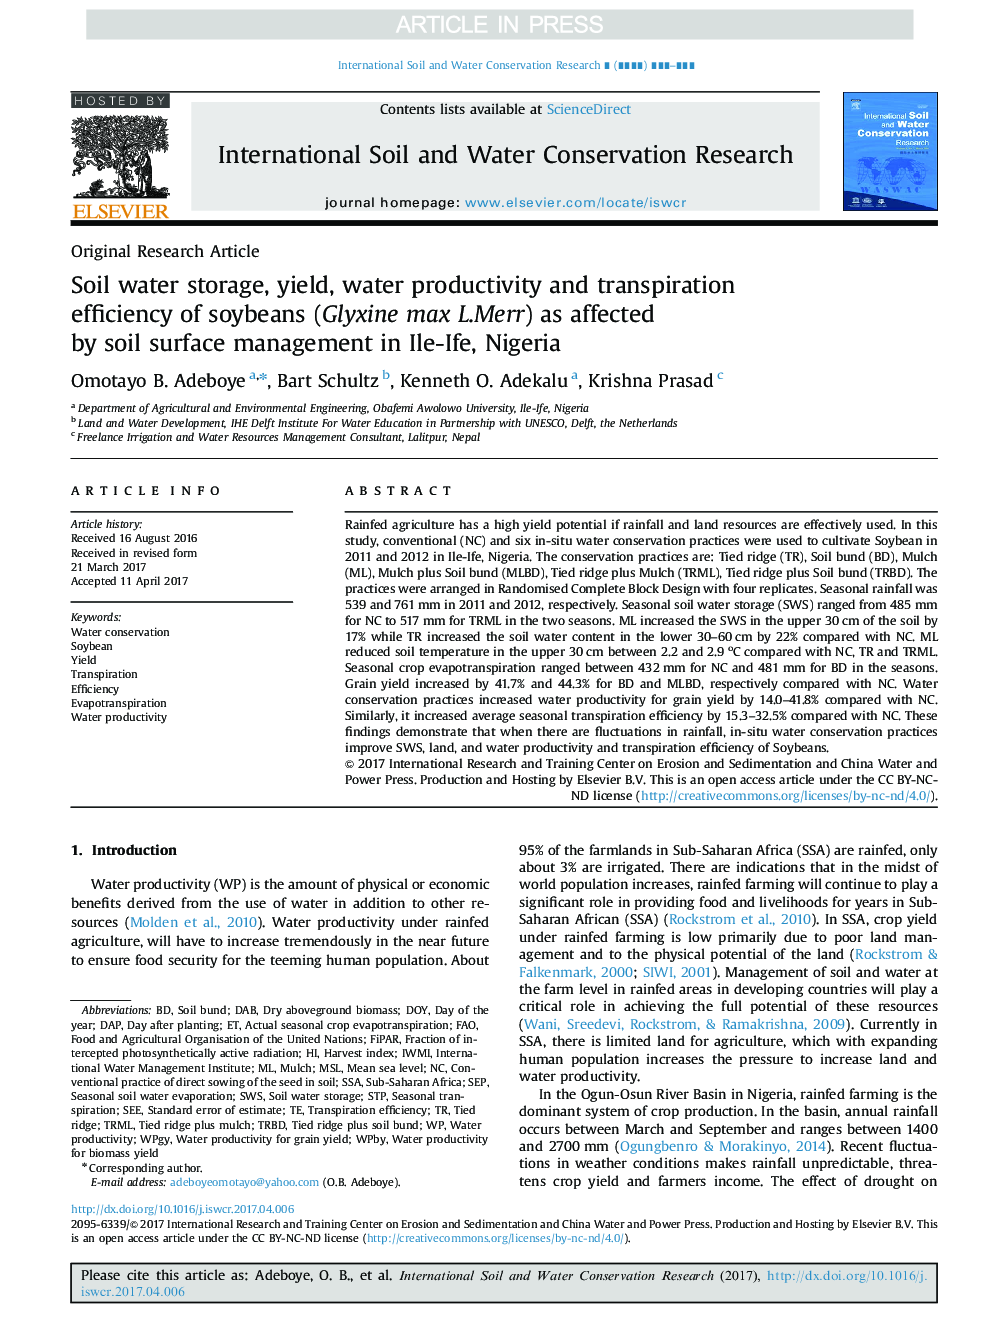 Soil water storage, yield, water productivity and transpiration efficiency of soybeans (Glyxine max L.Merr) as affected by soil surface management in Ile-Ife, Nigeria